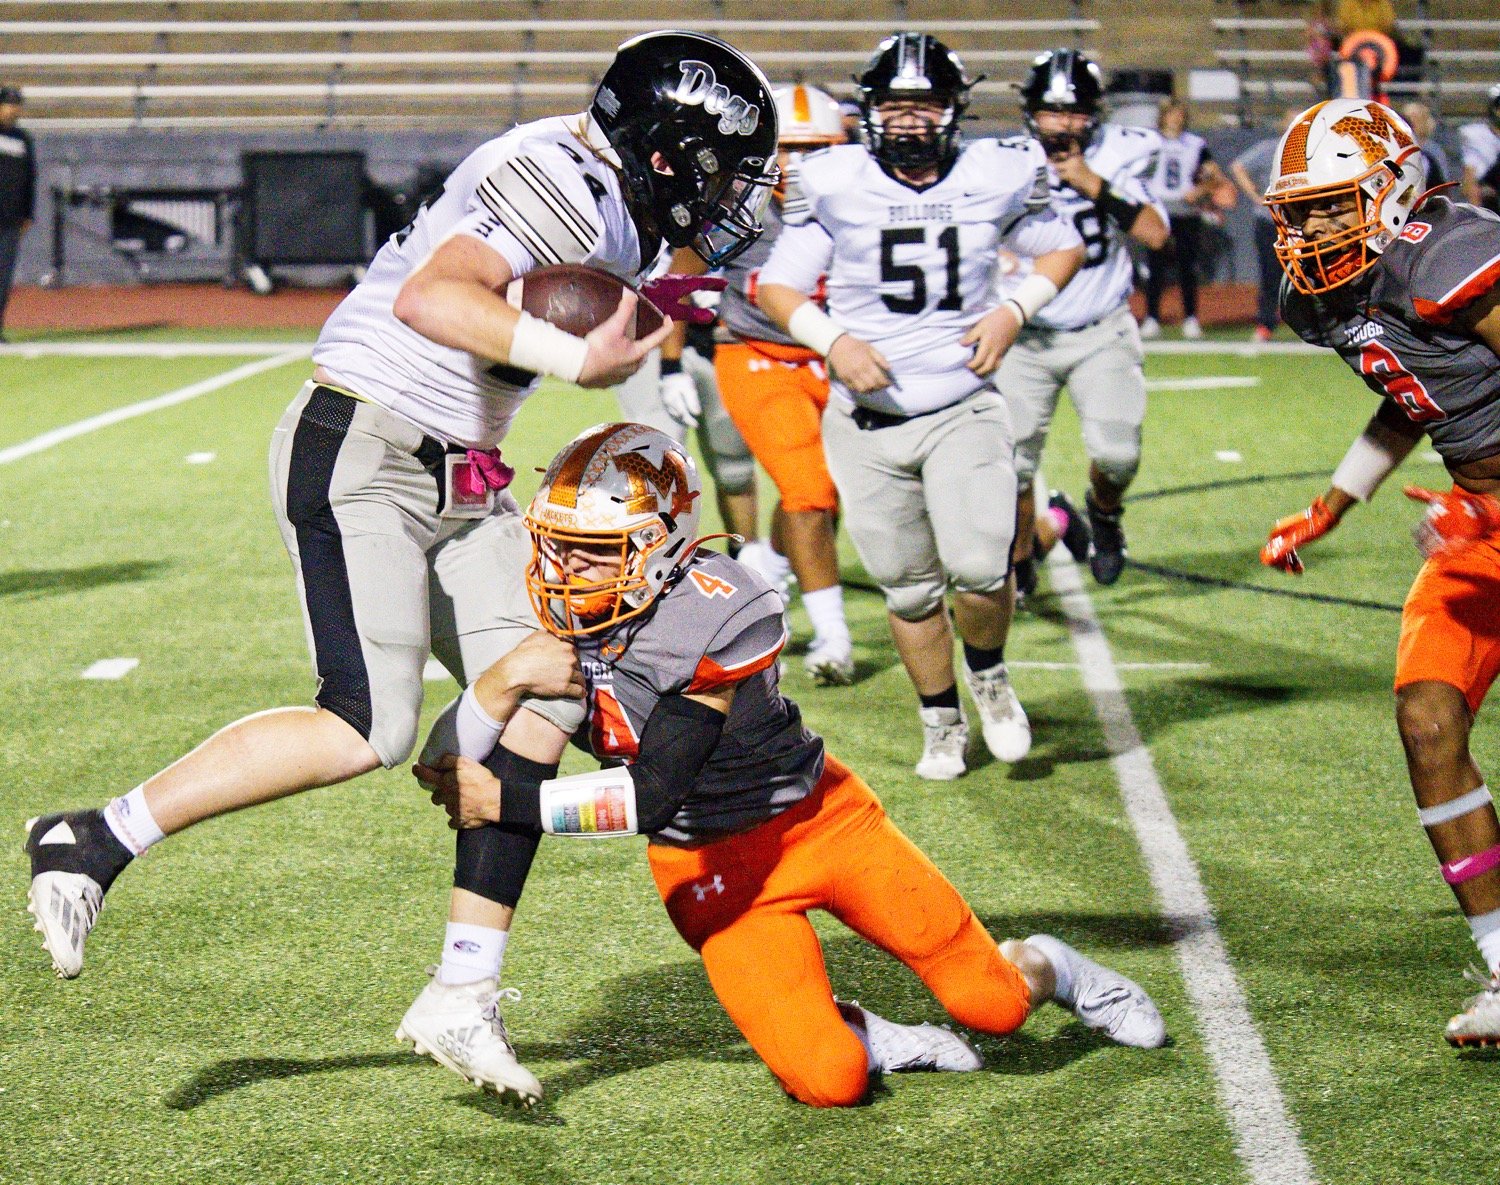 Coy Anderson wraps up the Howe ball carrier Oct. 22 at homecoming.